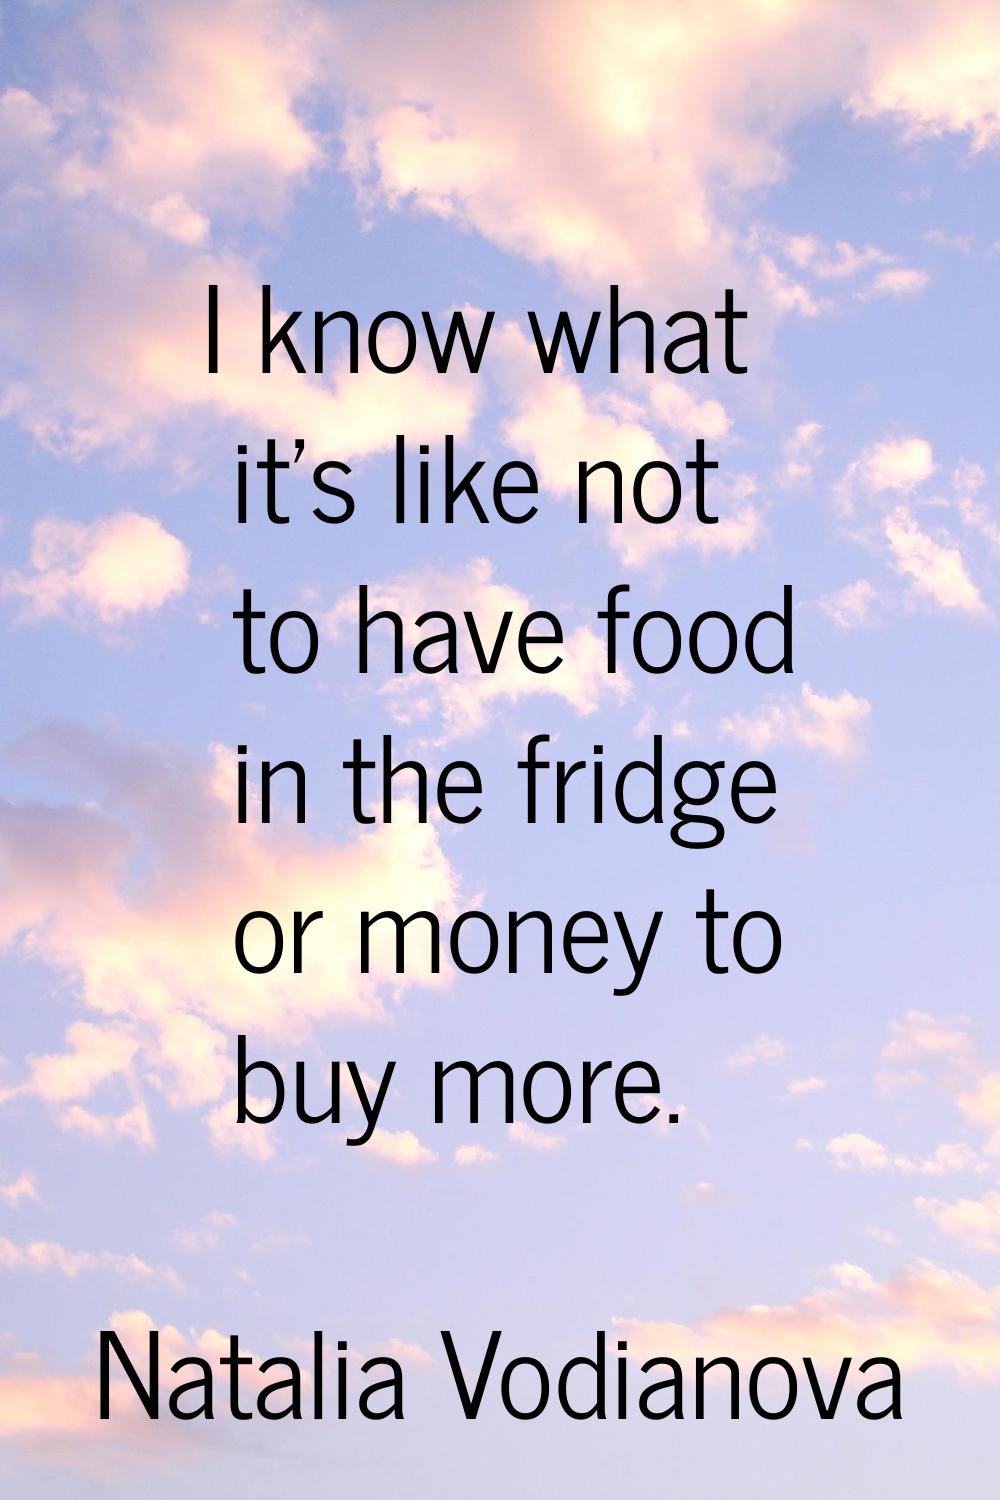 I know what it's like not to have food in the fridge or money to buy more.